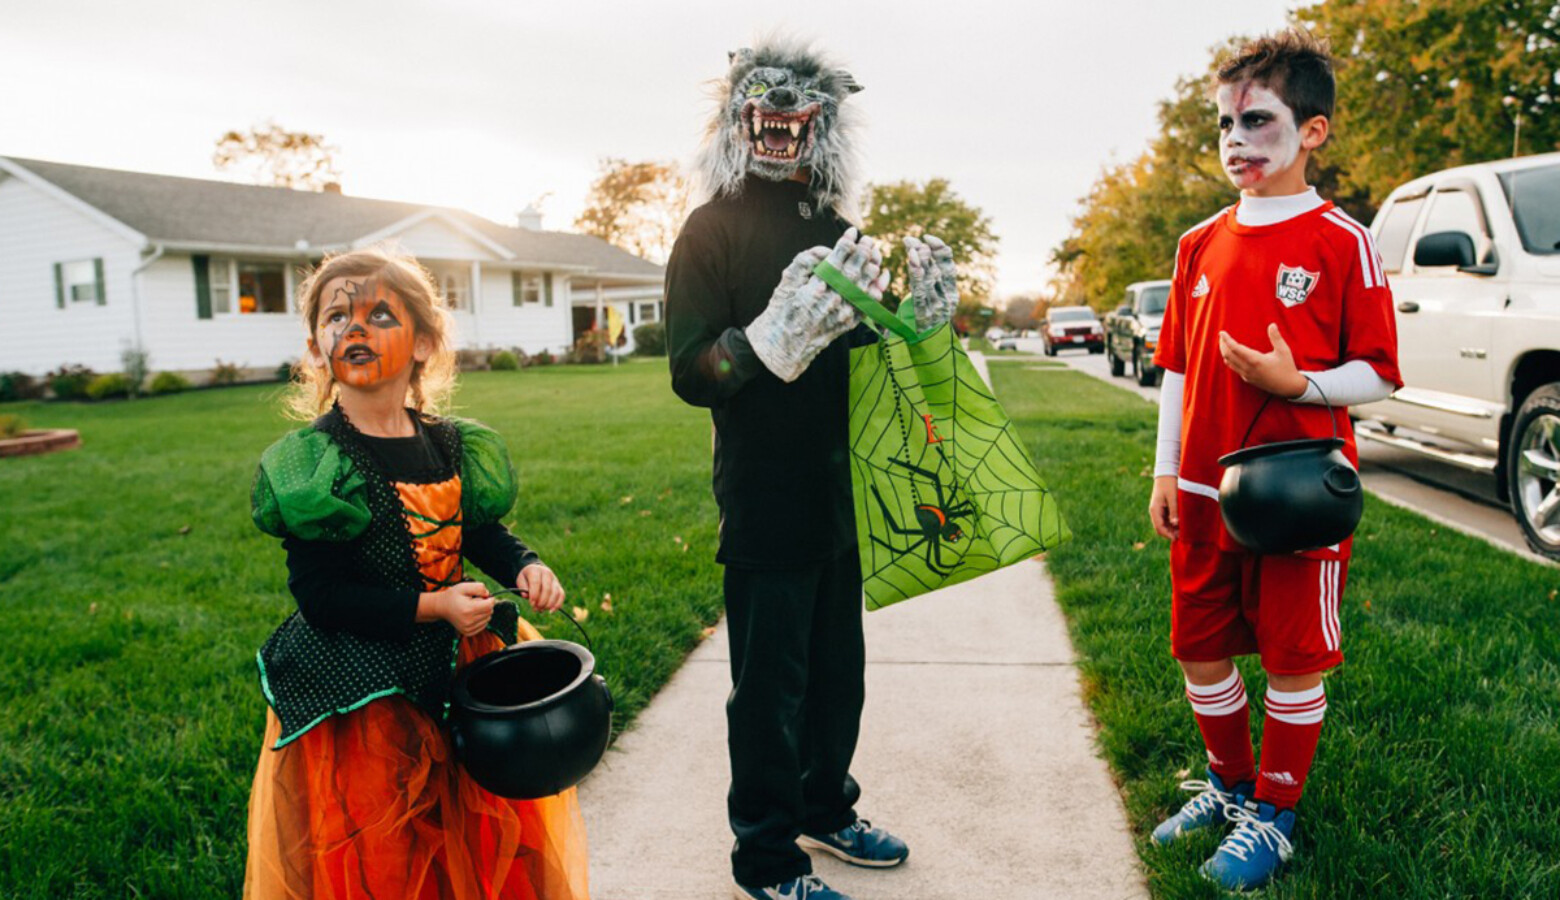 Indiana’s State Health Commissioner says she believes there is a safe way that Hoosiers can enjoy Halloween this fall amid the ongoing COVID-19 pandemic. (Pxhere)